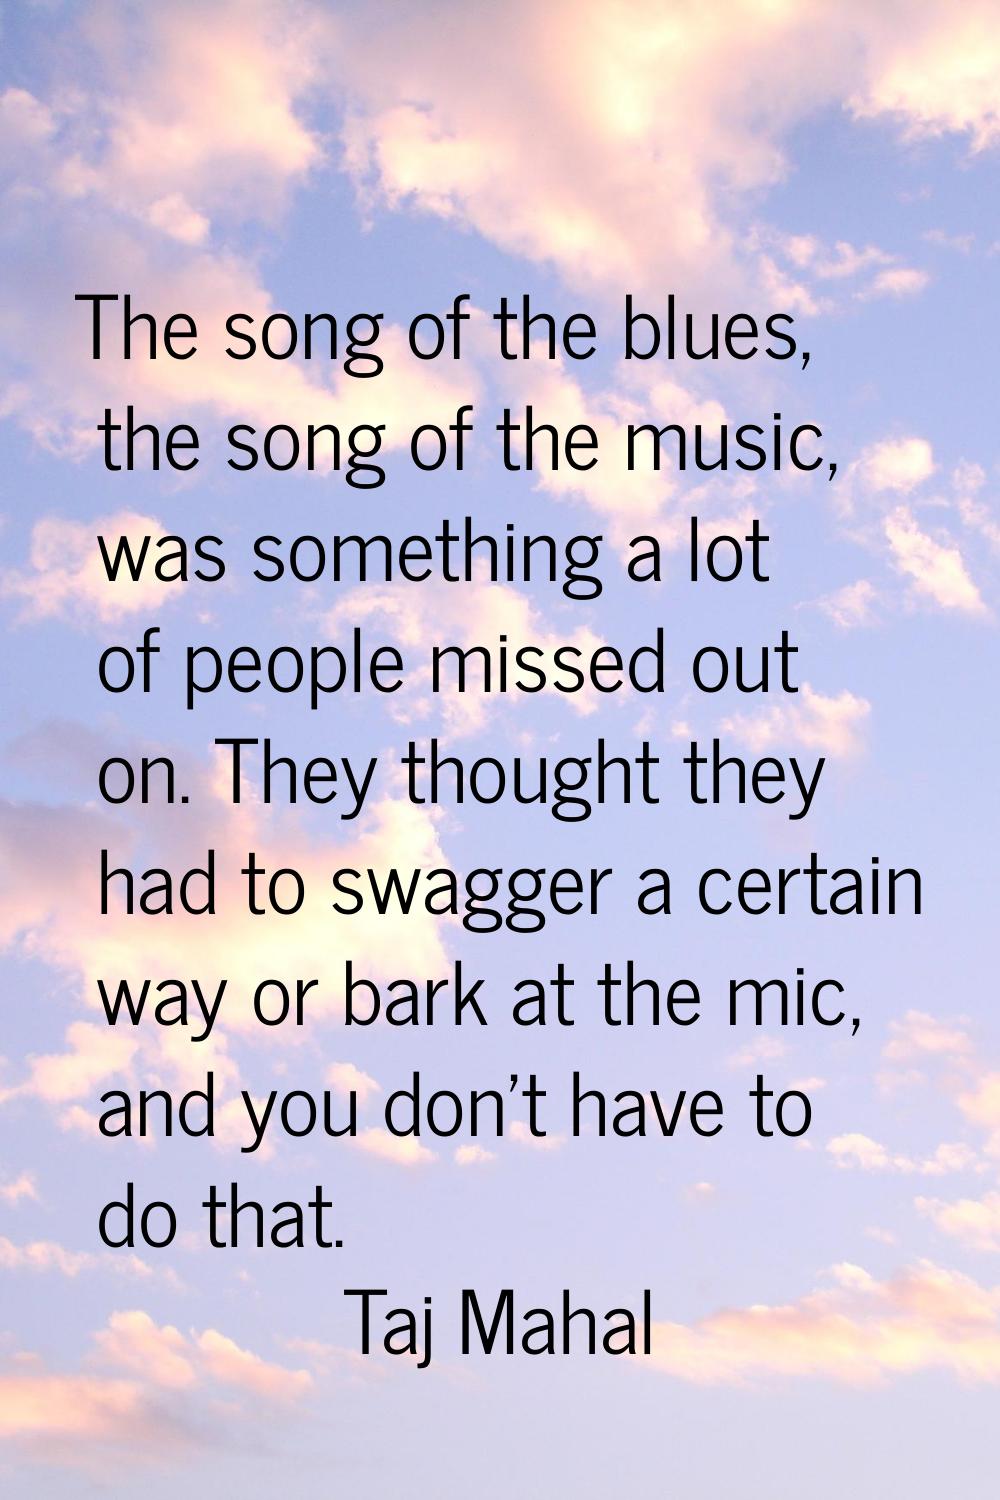 The song of the blues, the song of the music, was something a lot of people missed out on. They tho